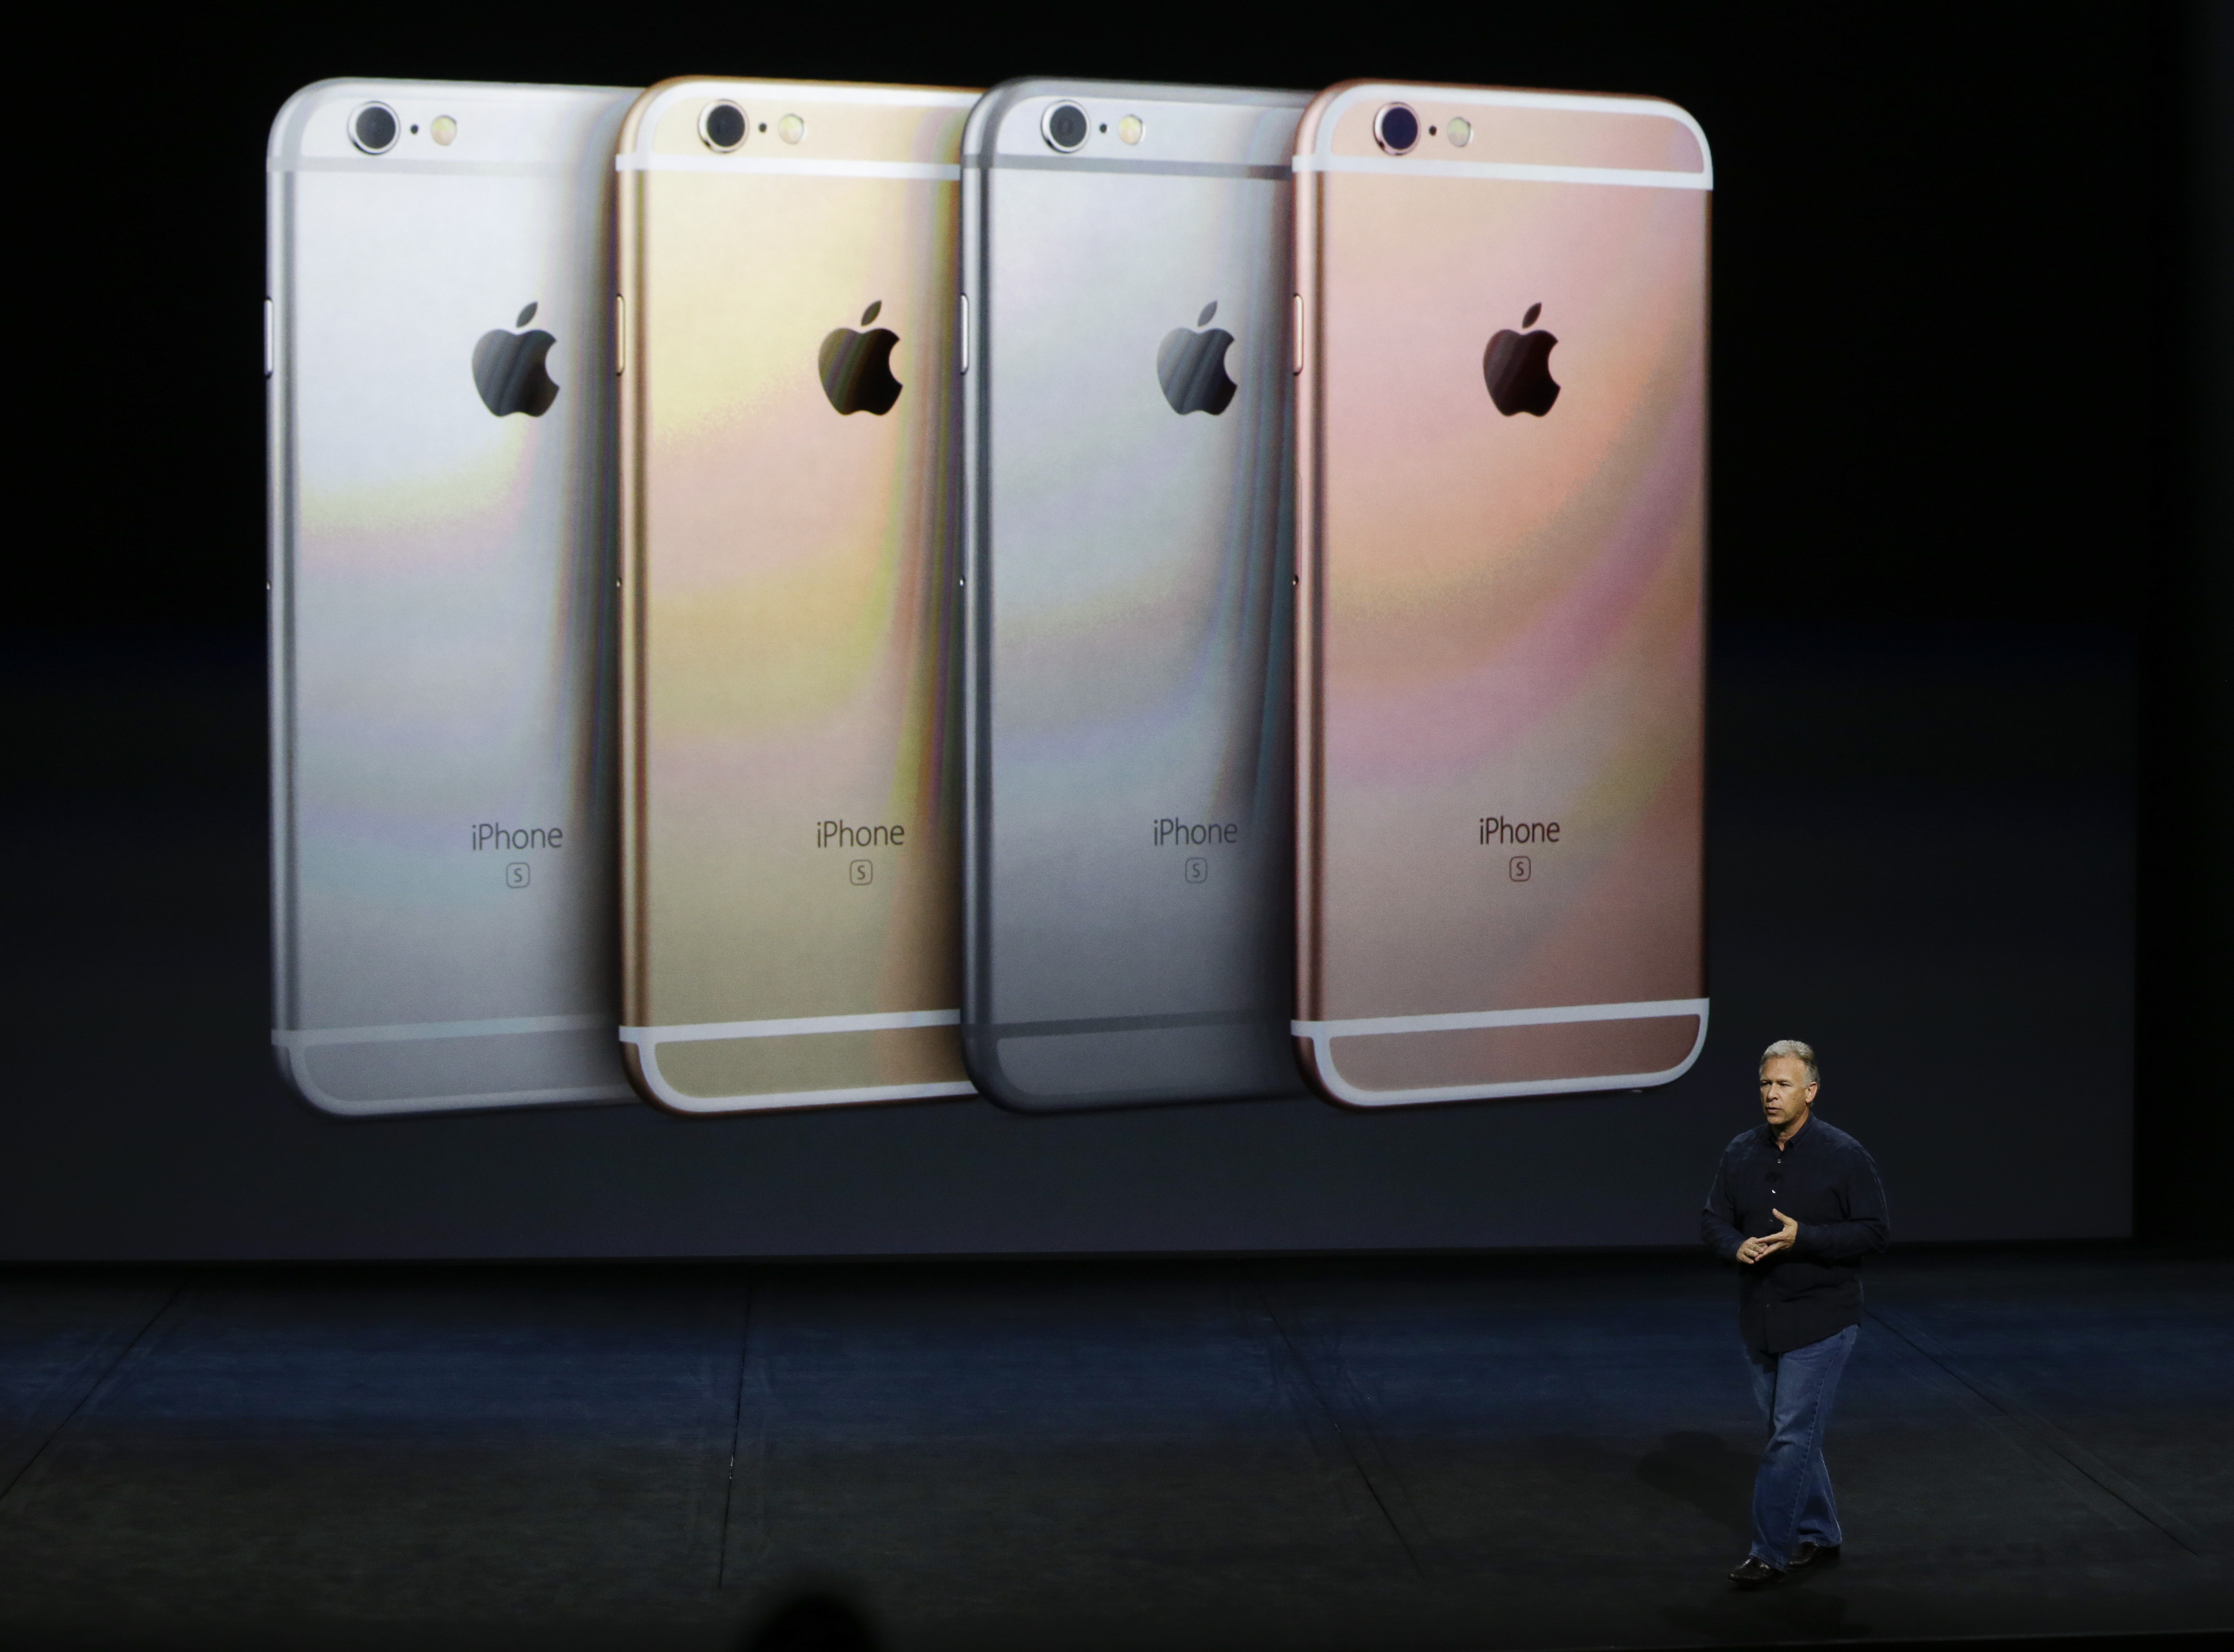 Phil Schiller, Apple's senior vice president of worldwide marketing, talks about the features of the new iPhone 6s and iPhone 6s Plus during the Apple event at the Bill Graham Civic Auditorium in San Francisco, Wednesday, Sept. 9, 2015. (AP Photo/Eric Risberg)